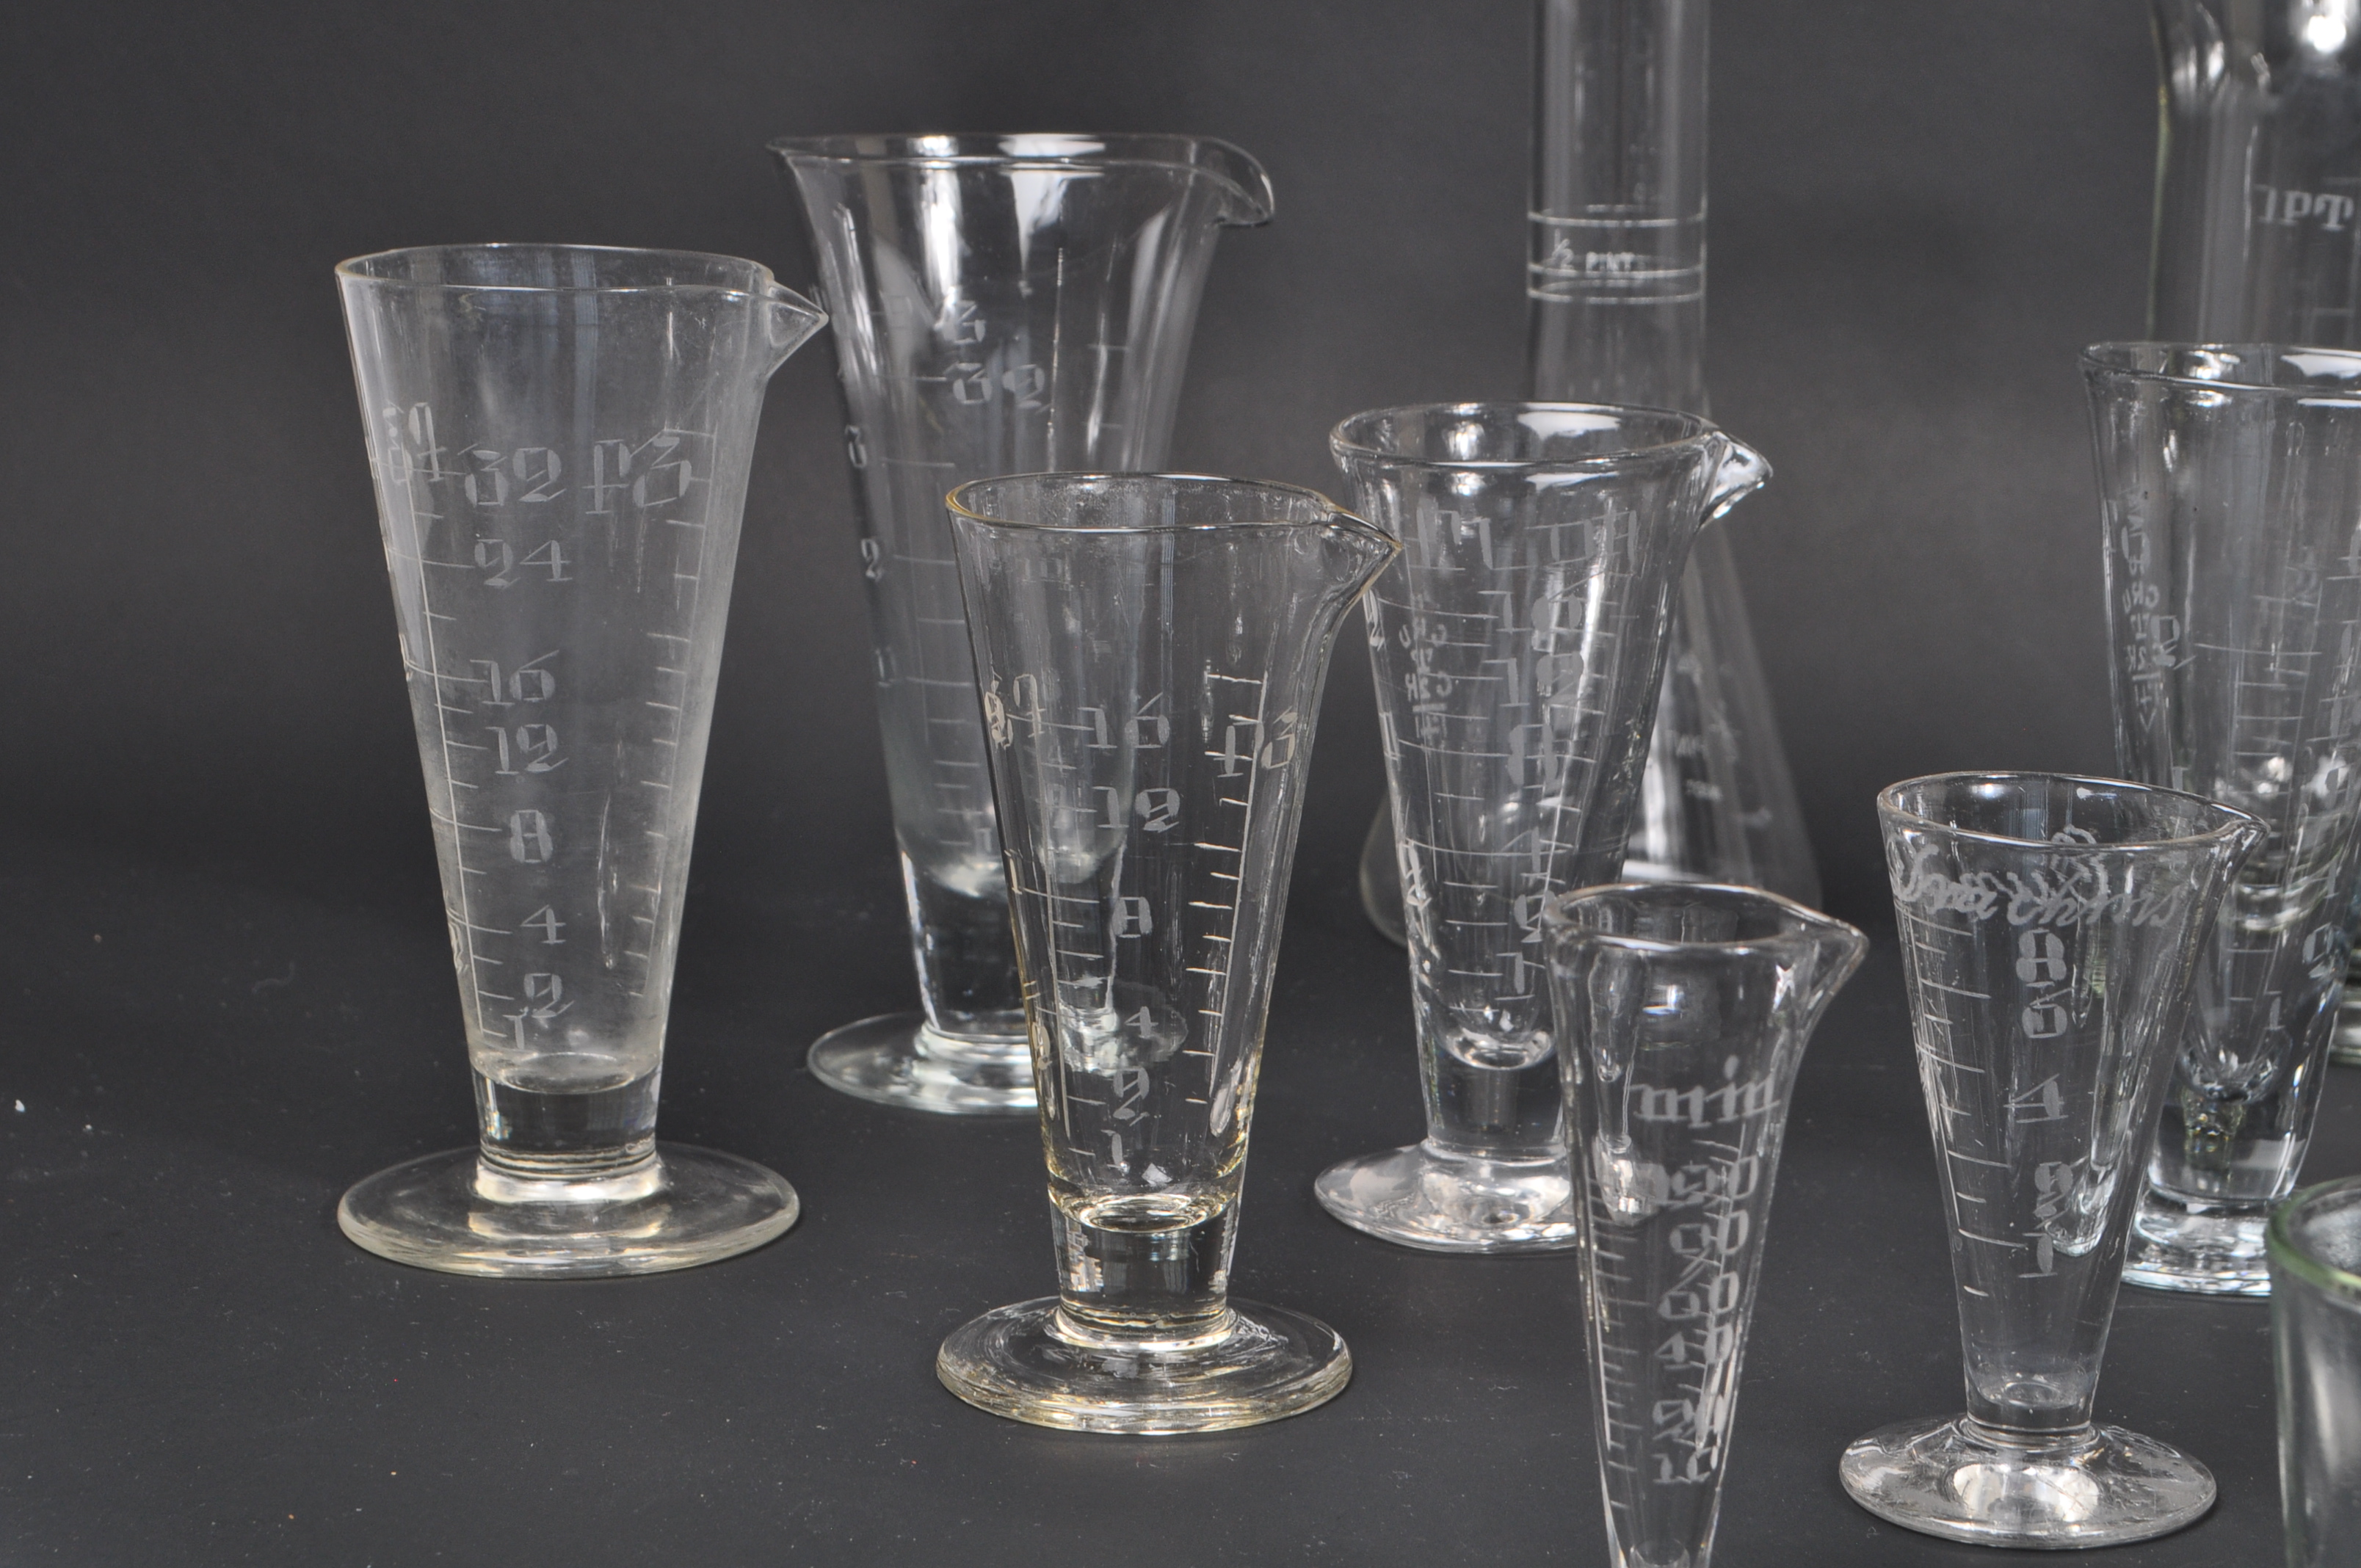 COLLECTION OF GLASS SCIENTIFIC CHEMICAL MEASURING EQUIPMENT - Image 2 of 11